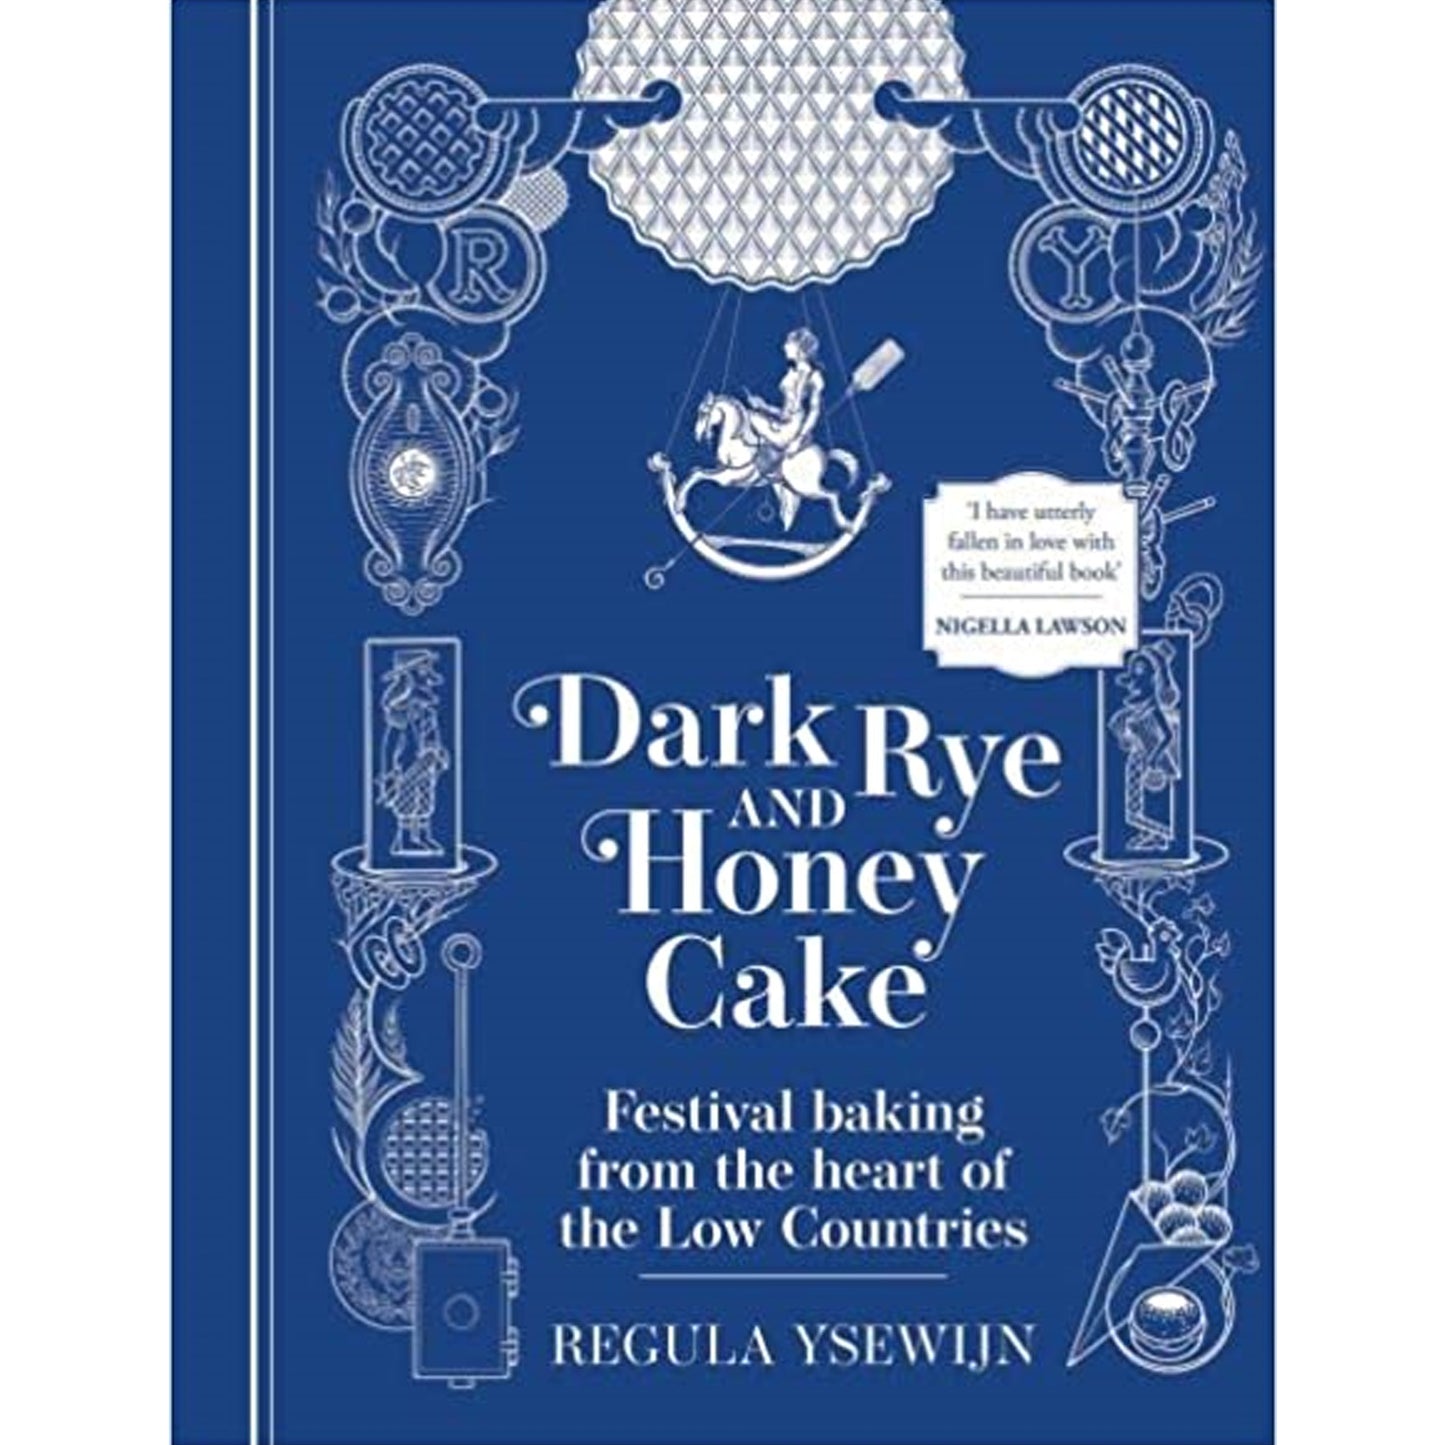 Dark Rye and Honey Cake - Festival baking from the heart of the Low Countries